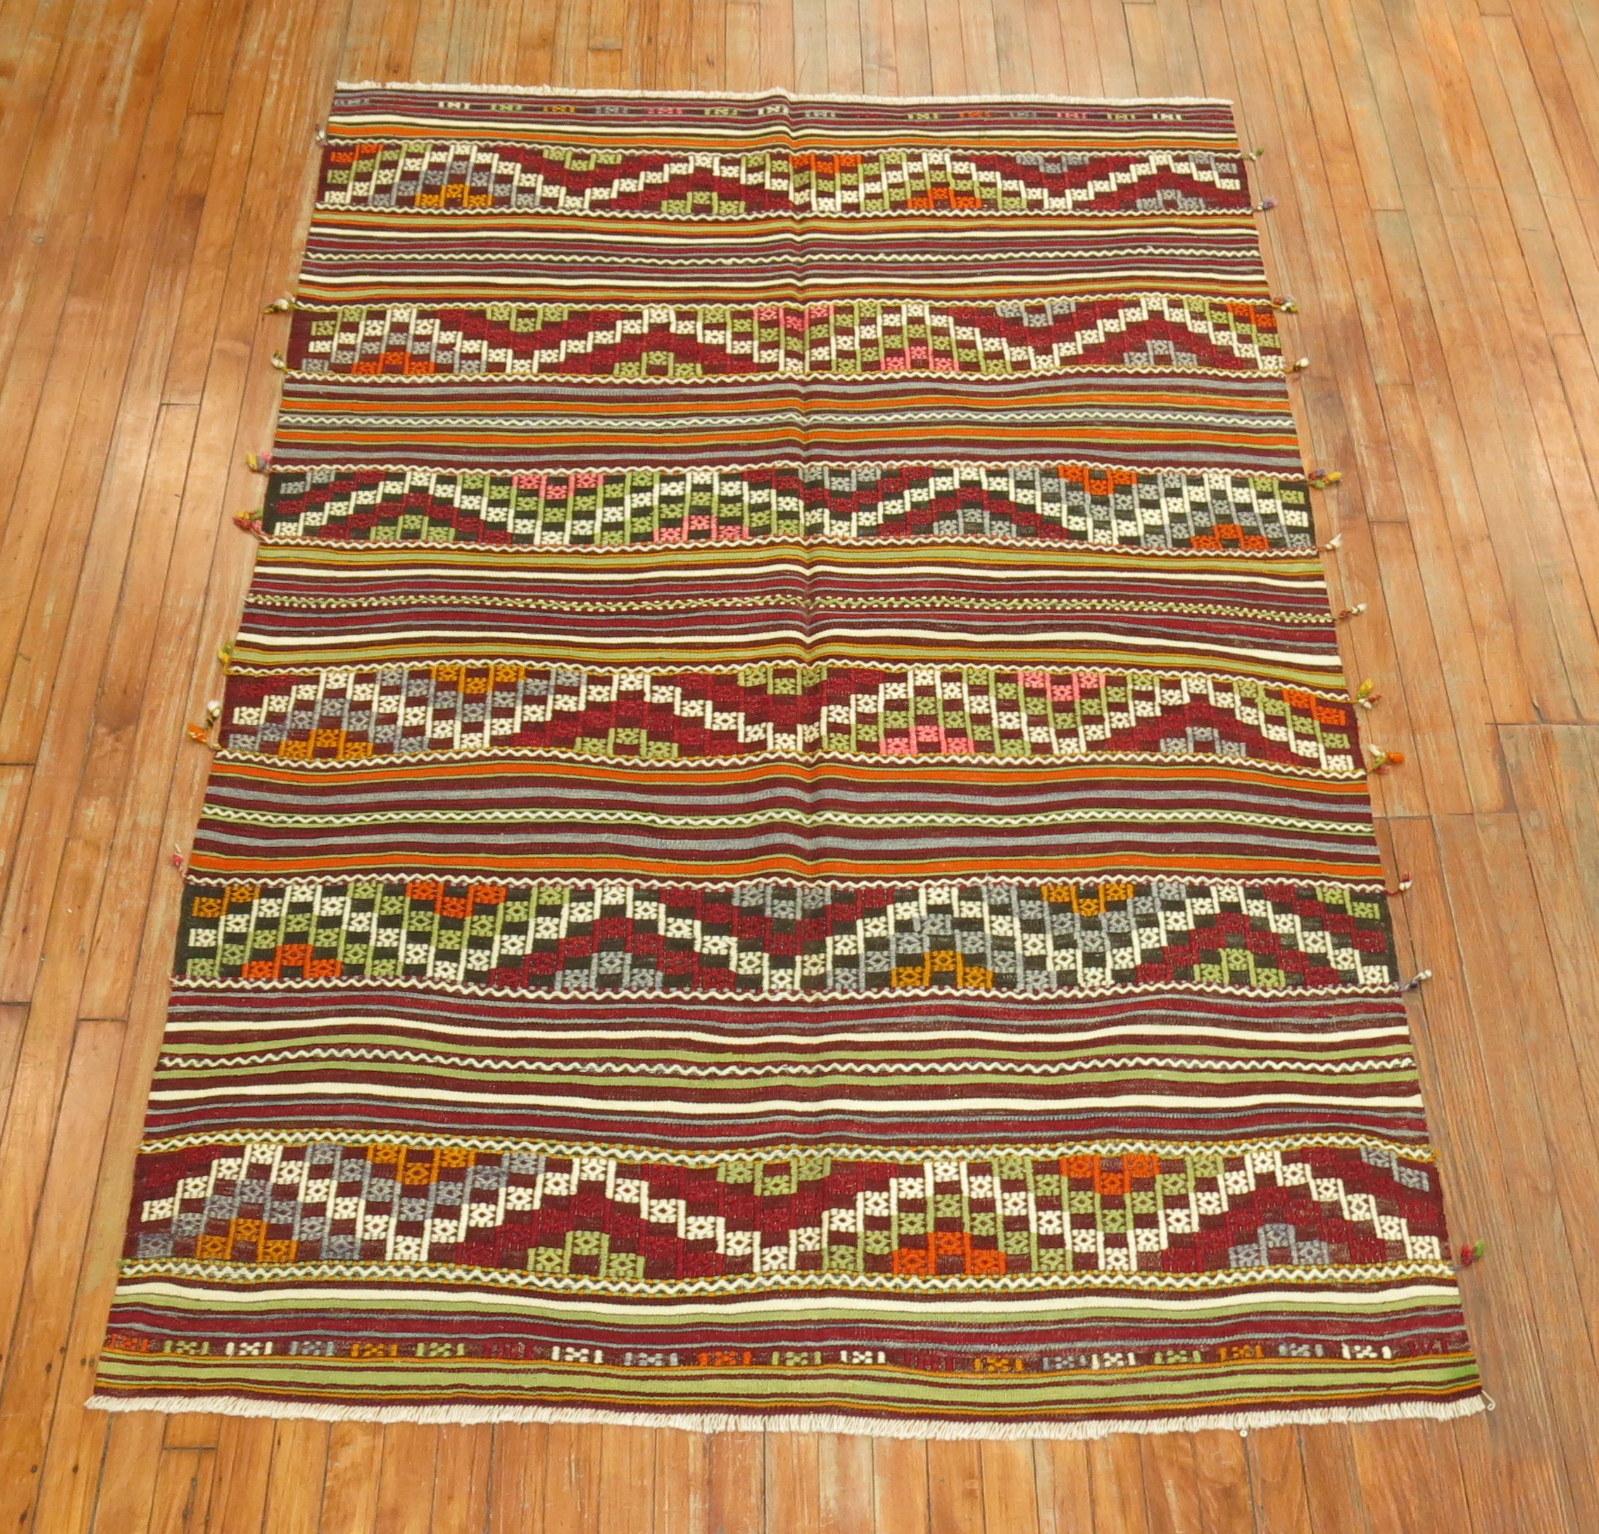 Intermediate colorful midcentury Turkish Jajim also known as Jijim.
Great price and great size

Measures: 4'11